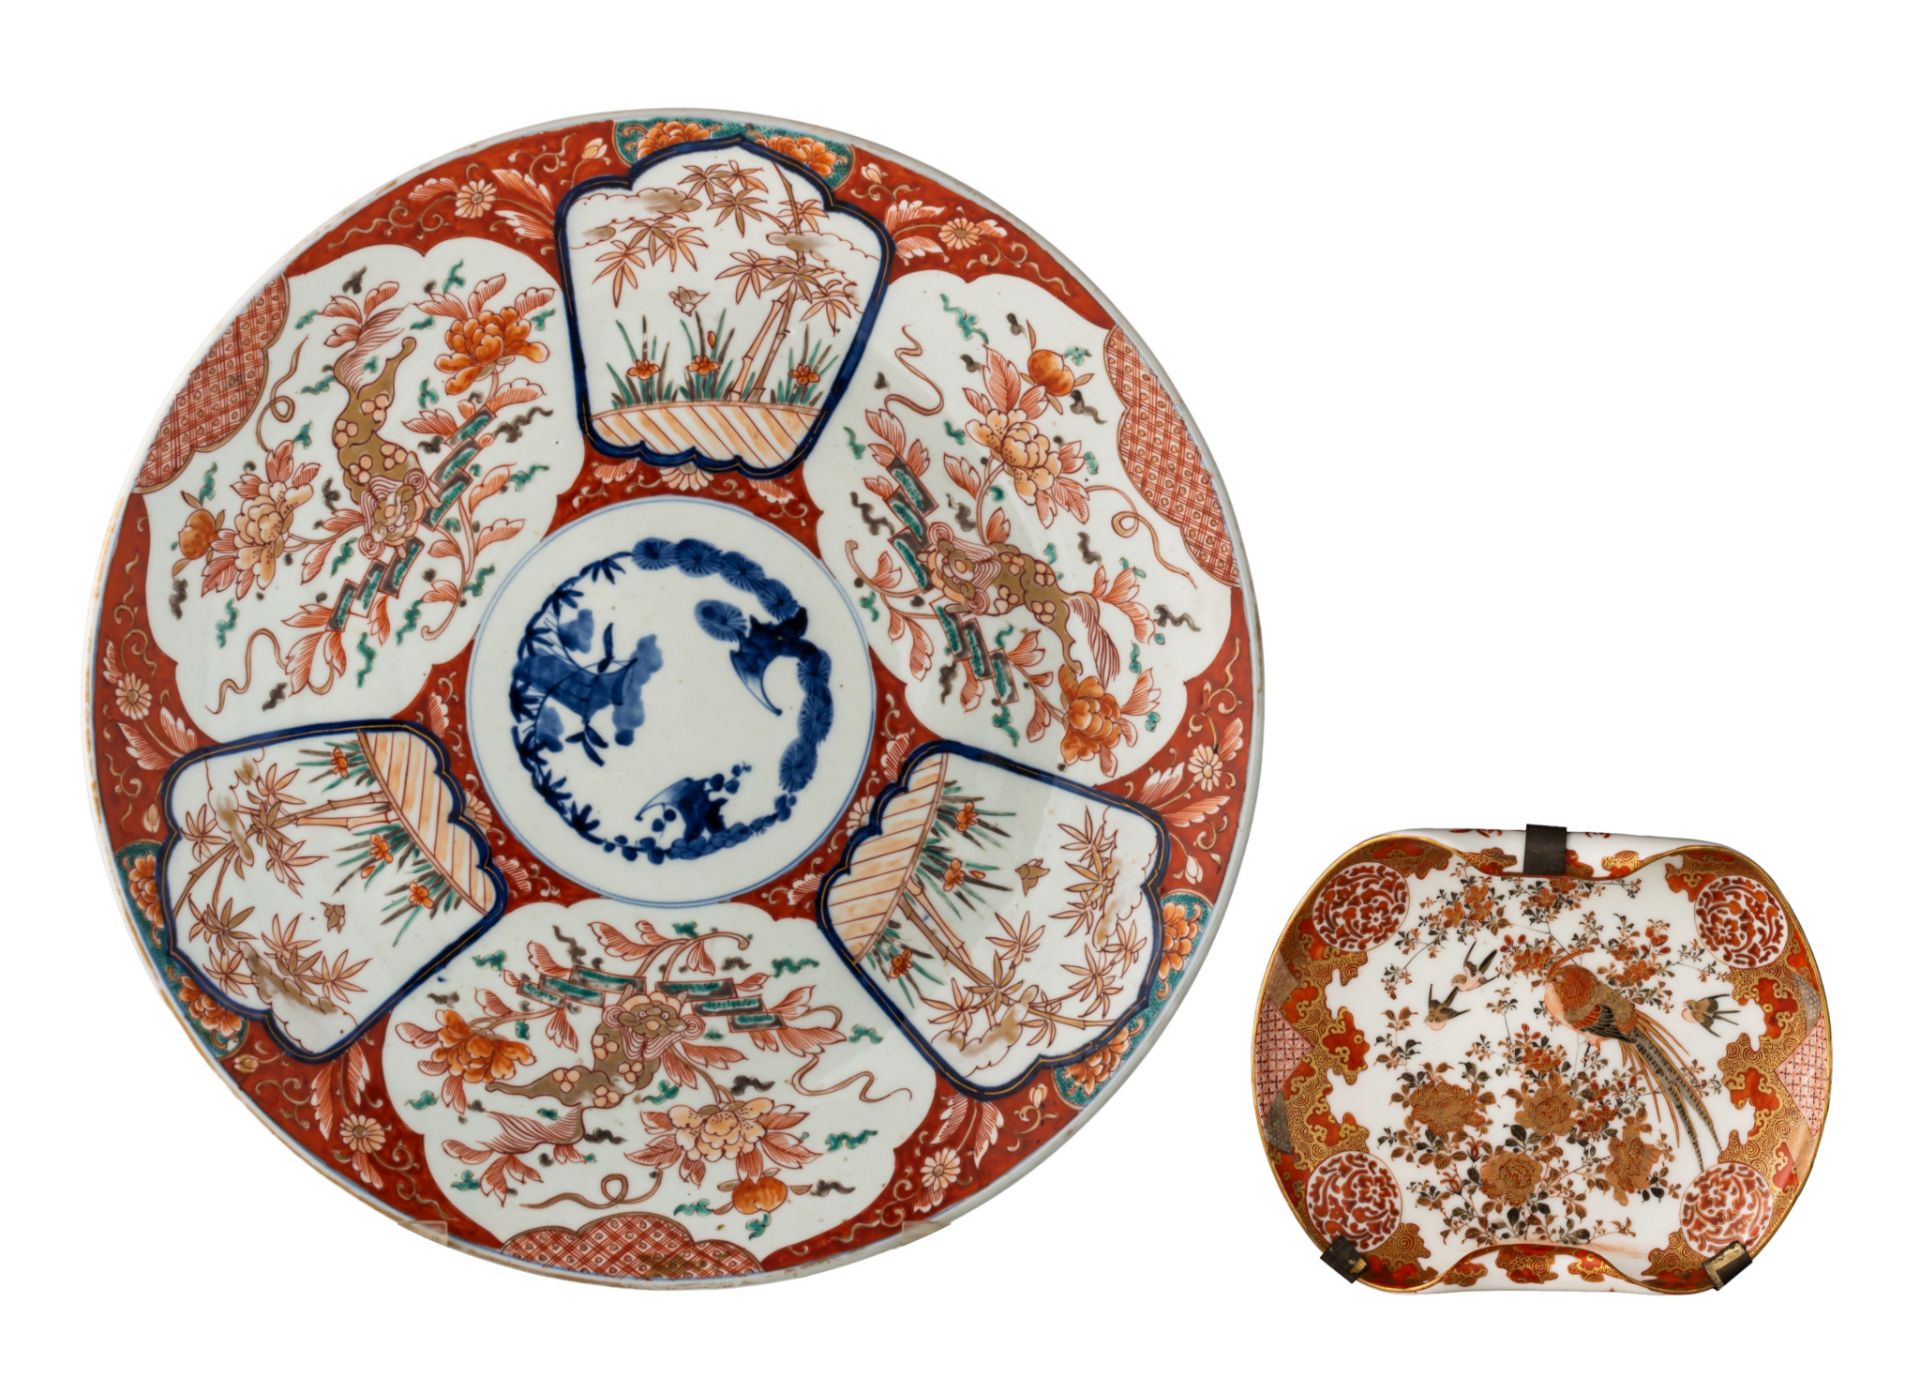 A Japanese Imari charger and a 'Rolled' plate, late 19thC, ø 47,5 (charger) - 22,5 x 18 cm (plate)